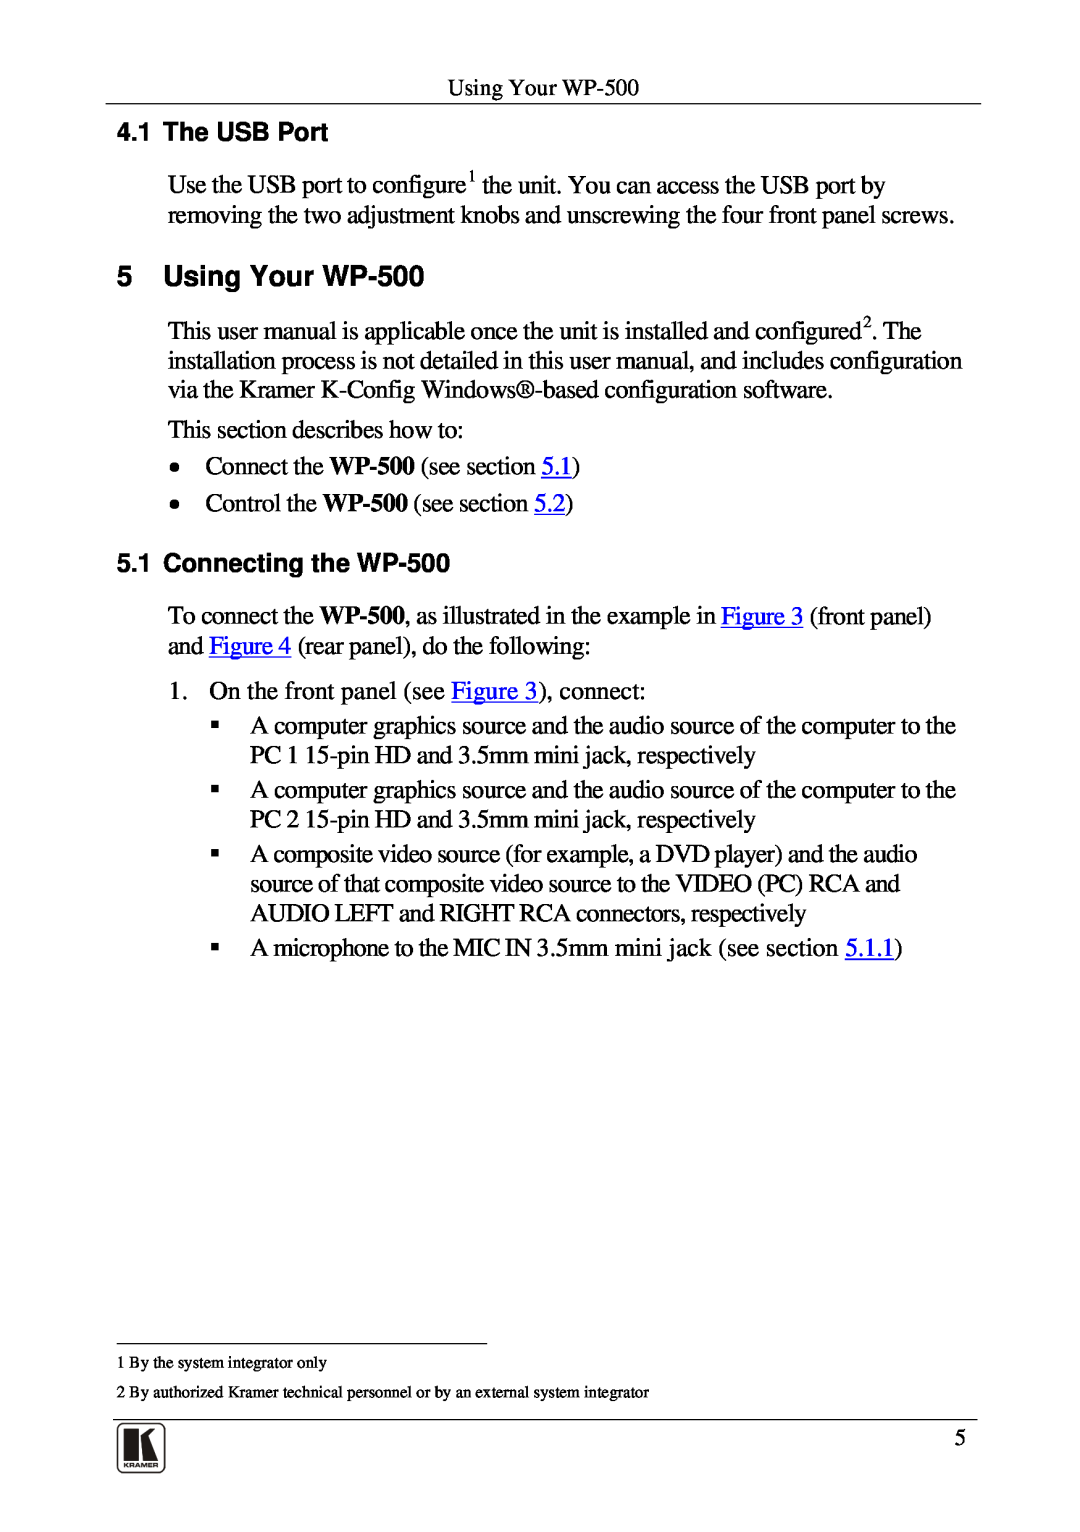 Kramer Electronics user manual Using Your WP-500, The USB Port, 5.1Connecting the WP-500 